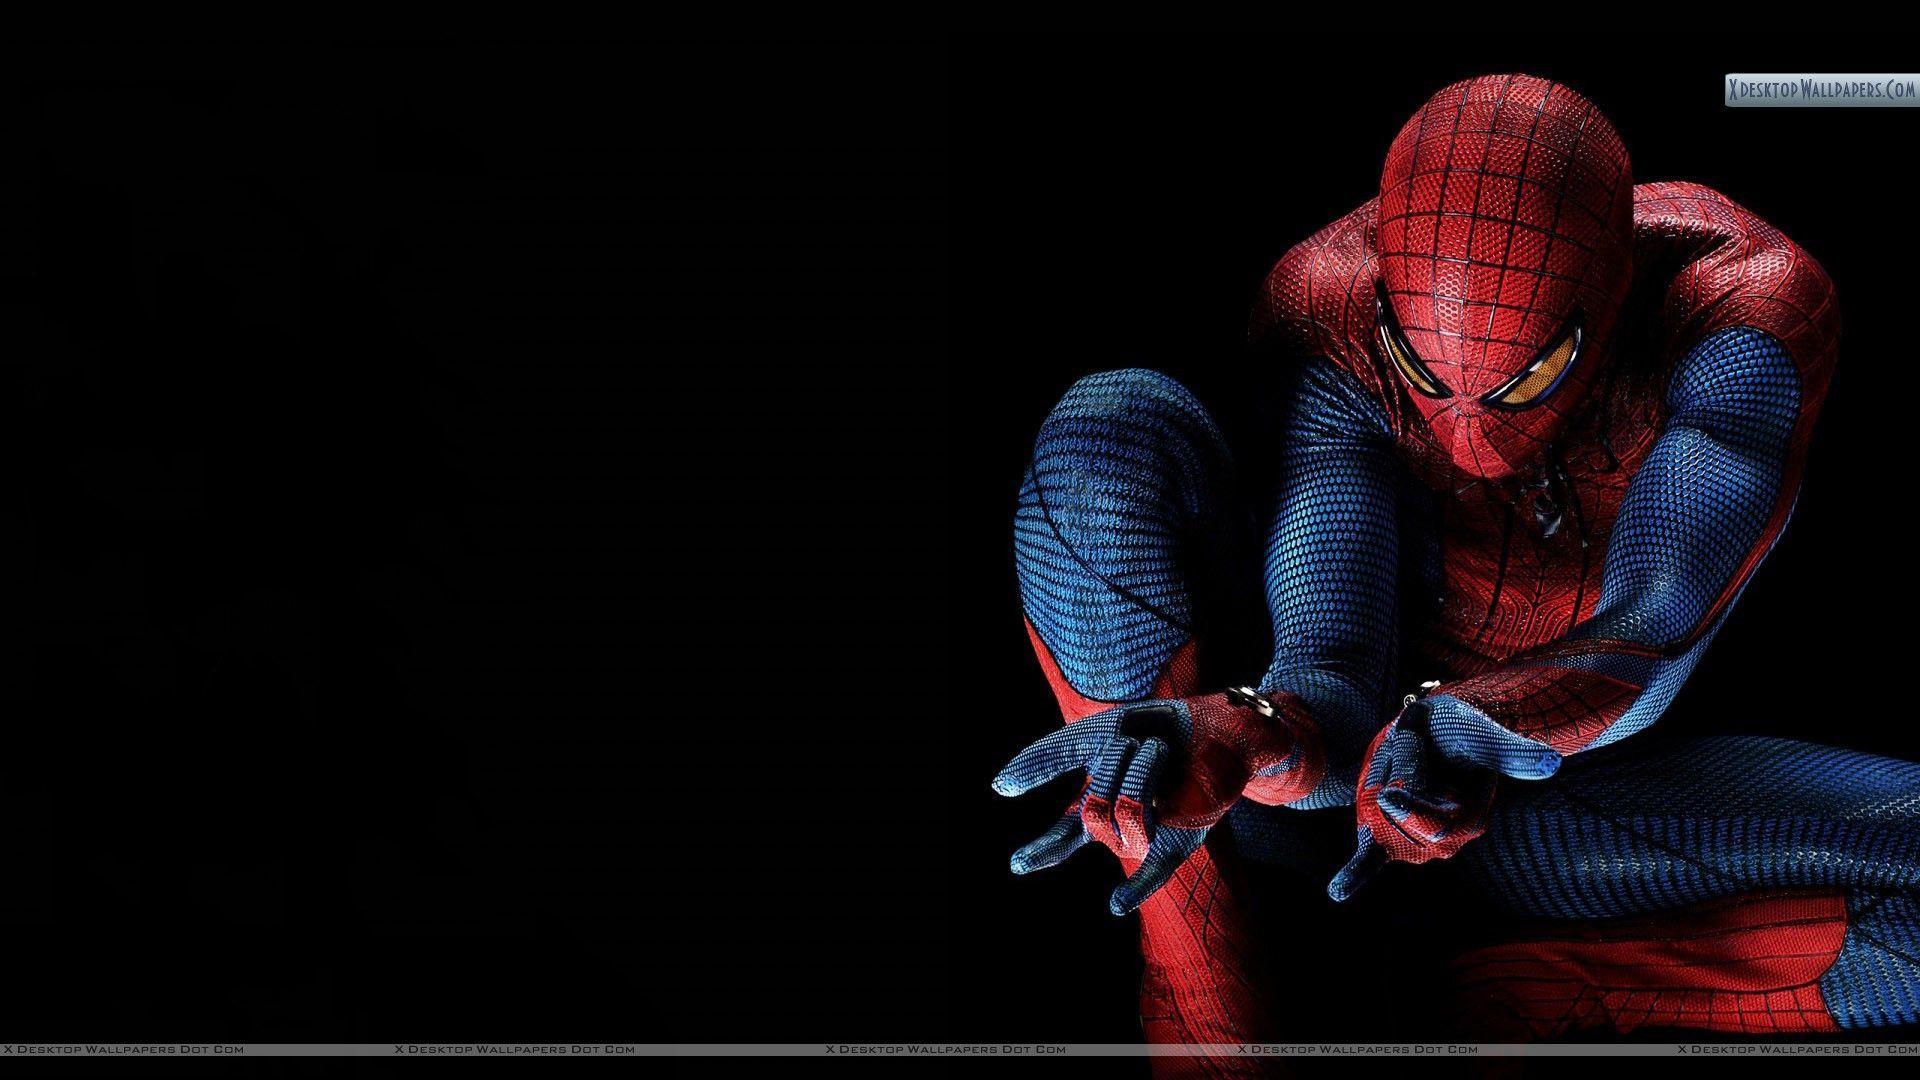 Spiderman Wallpaper with 1920x1080 Resolution in 2019